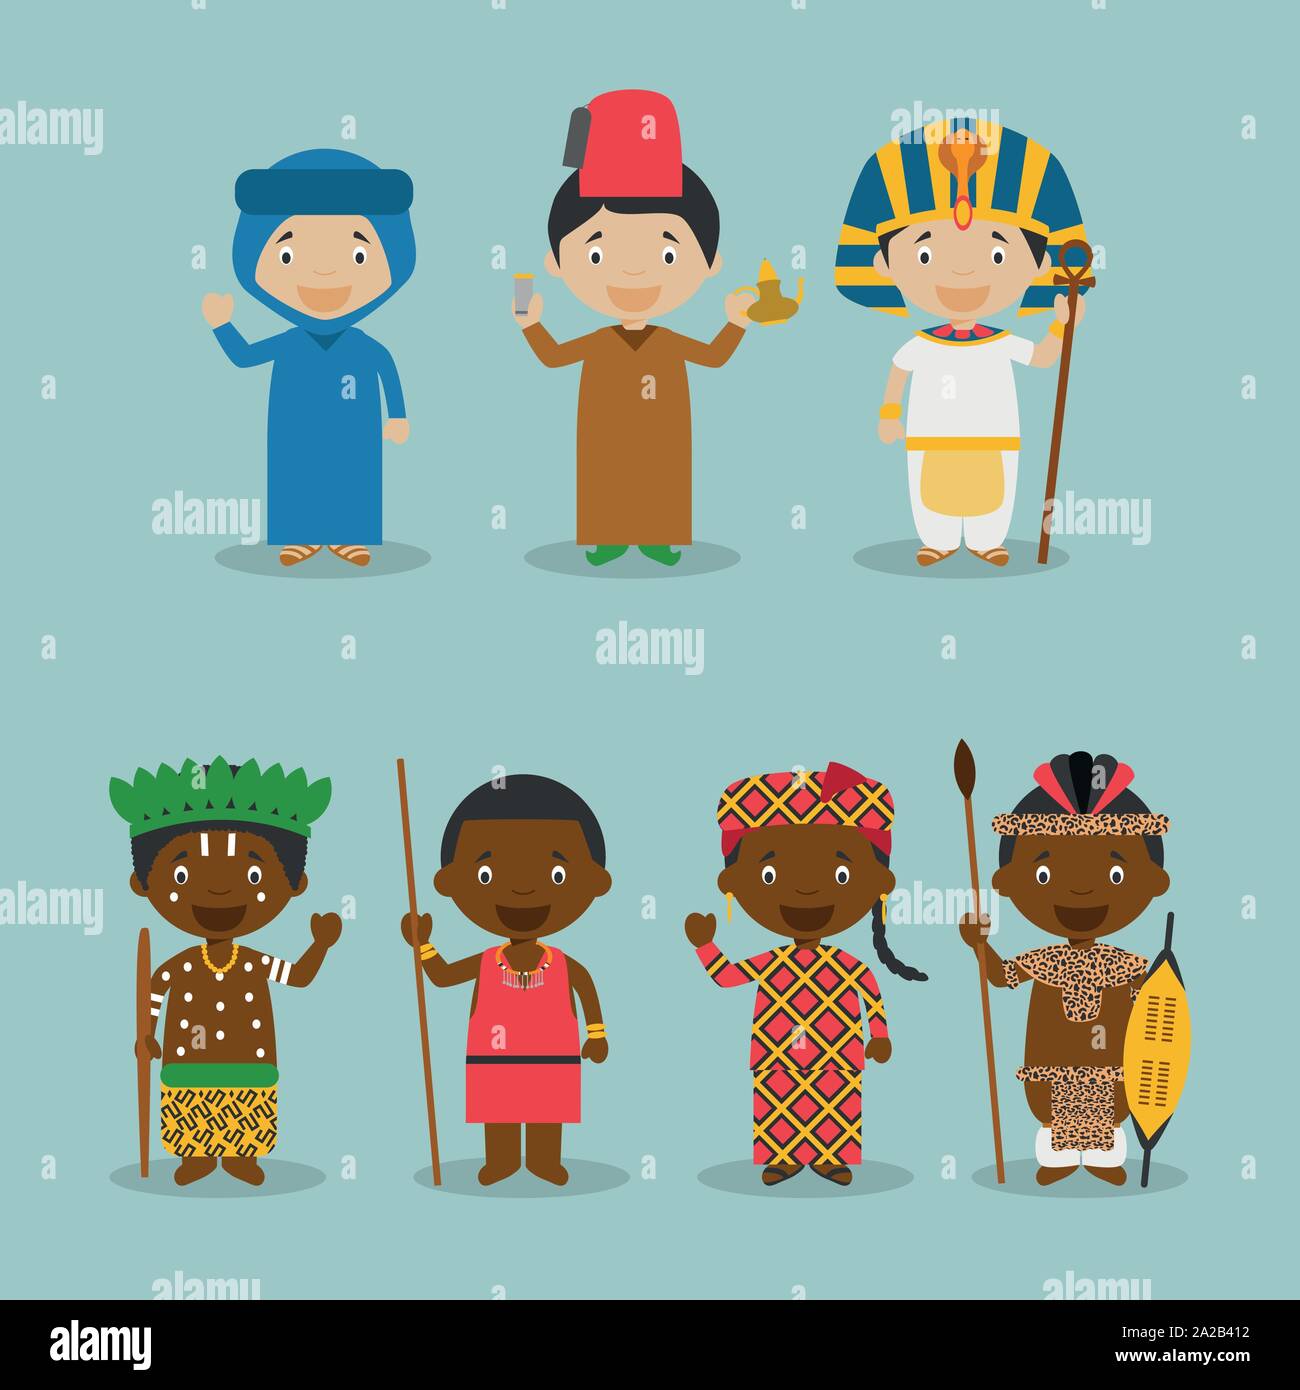 Kids and nationalities of the world vector: Africa Set 2. Set of 7 characters dressed in different national costumes Stock Vector